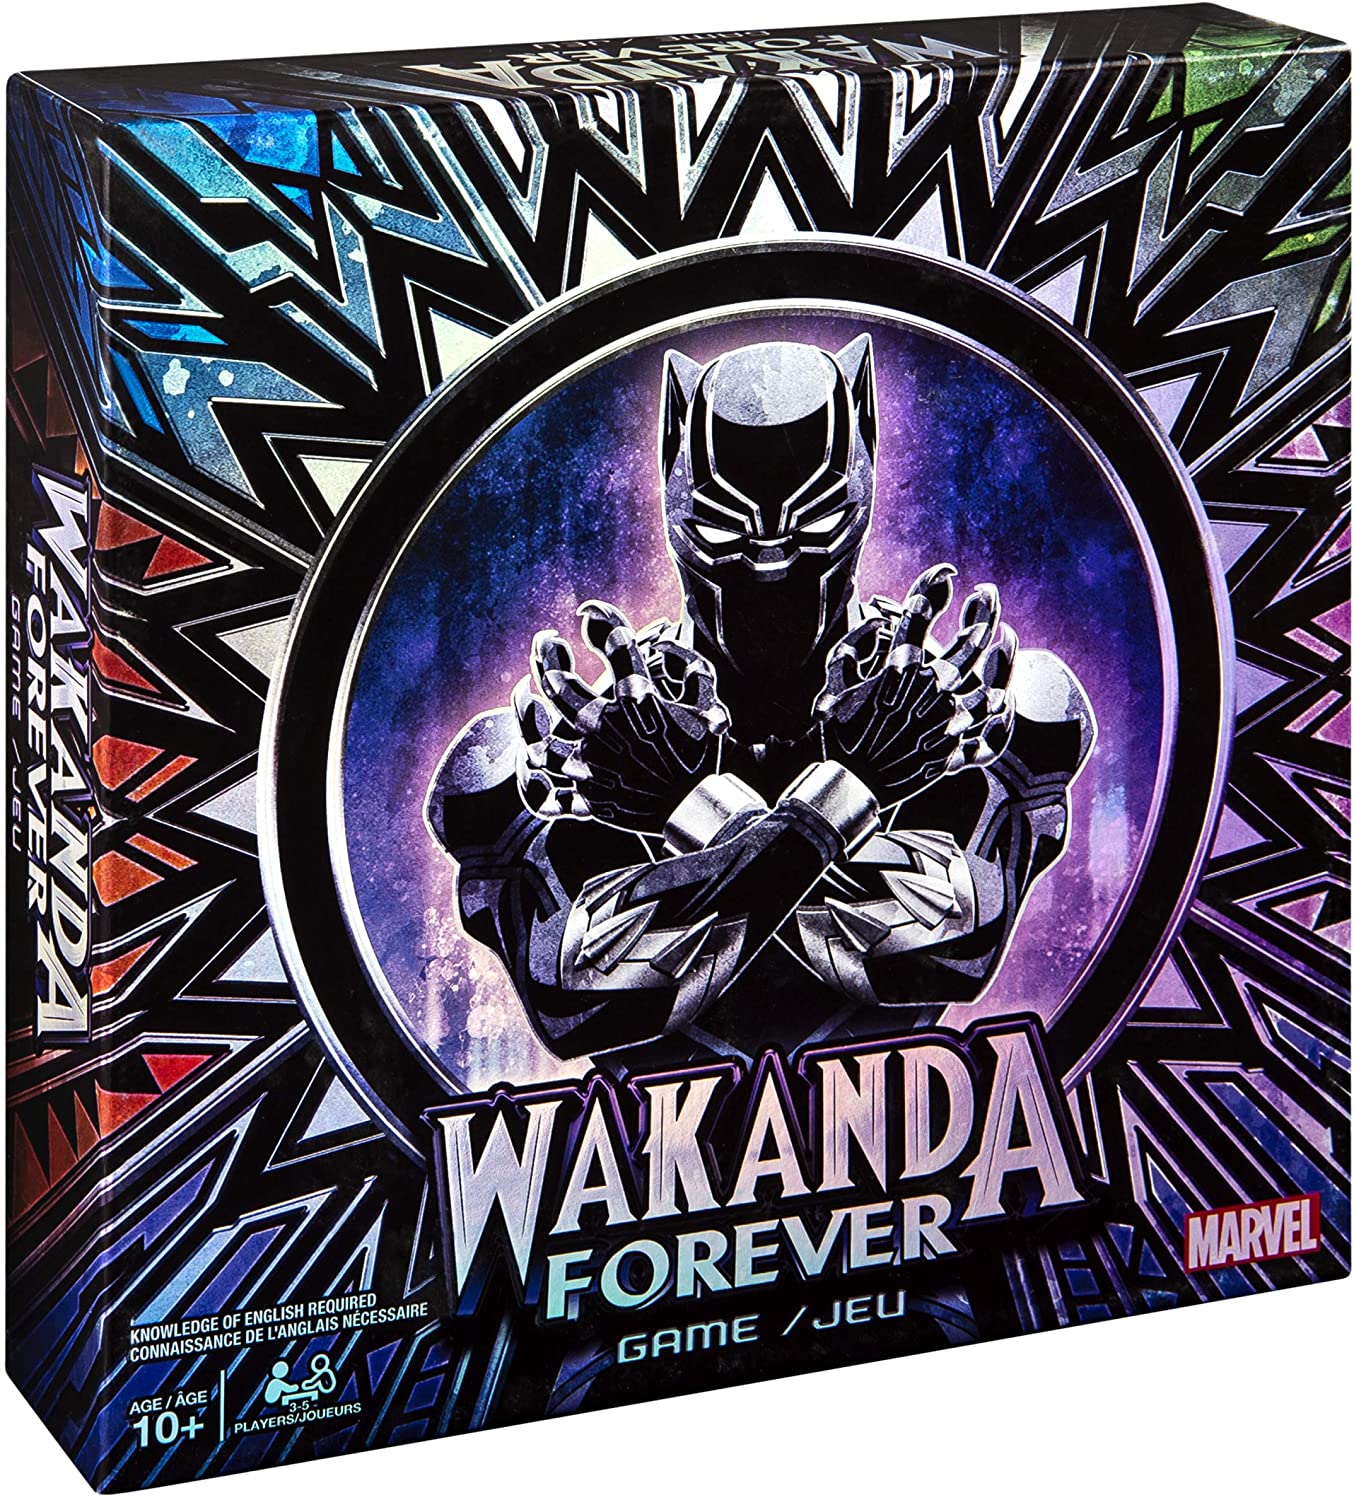 Marvel Wakanda Forever Black Panther Dice-Rolling Game for Families, Teens & Adults $9.99 (REG $29.99)